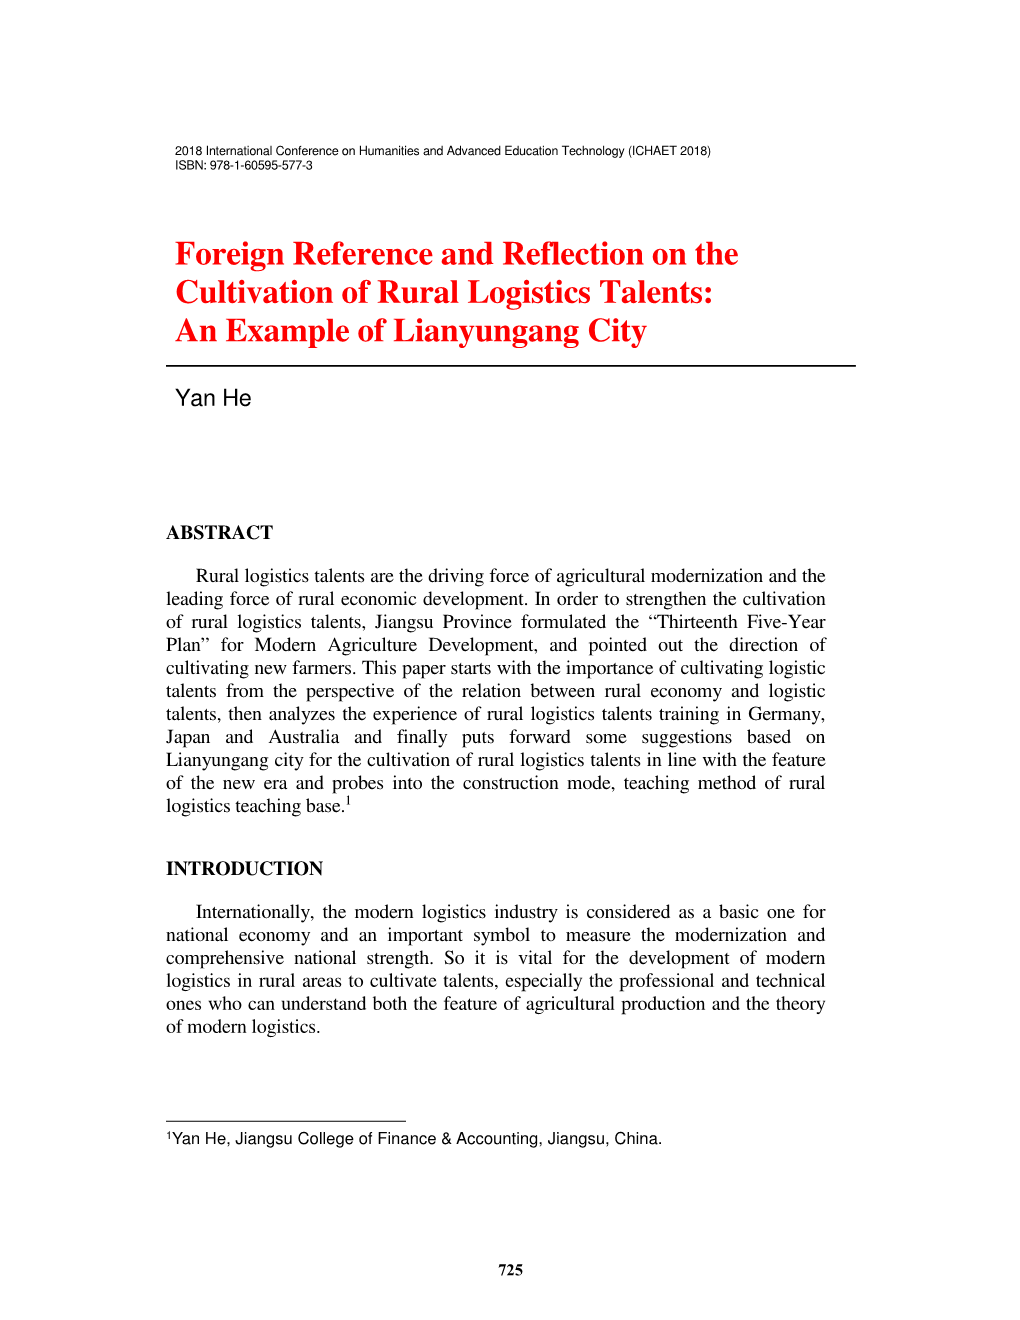 Foreign Reference and Reflection on the Cultivation of Rural Logistics Talents: an Example of Lianyungang City